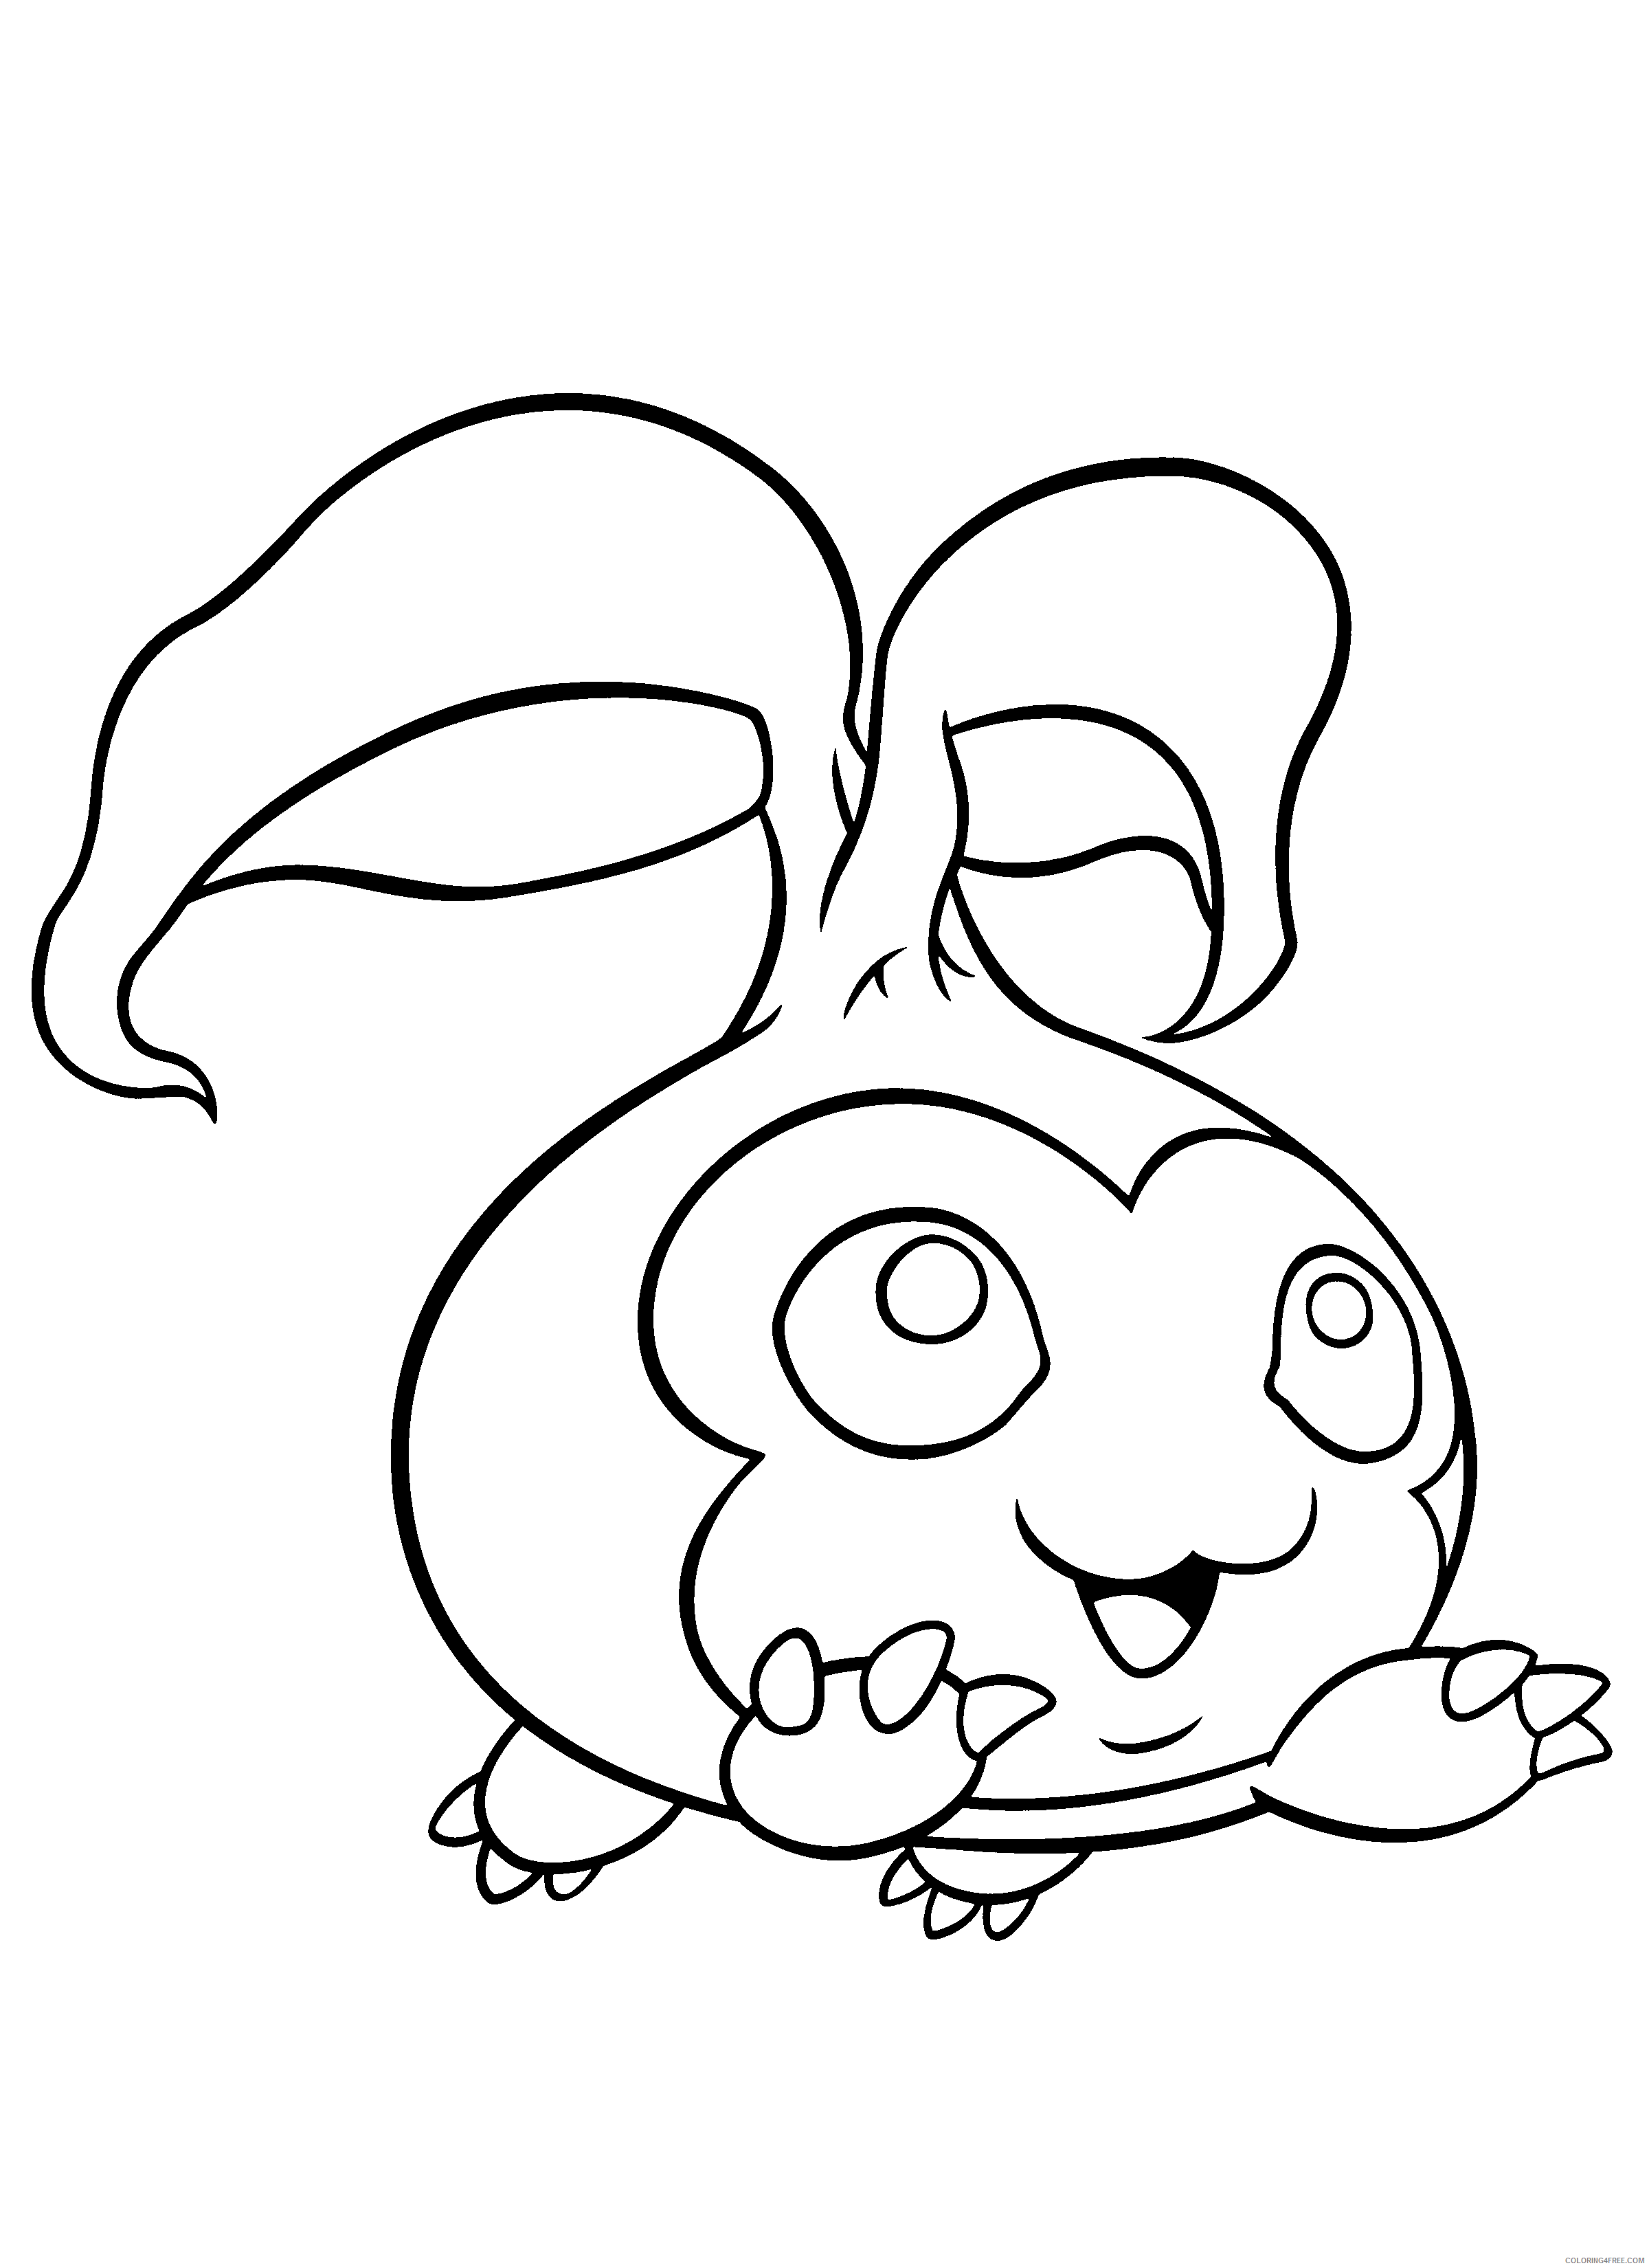 Digimon Printable Coloring Pages Anime digimon 263 2021 0344 Coloring4free